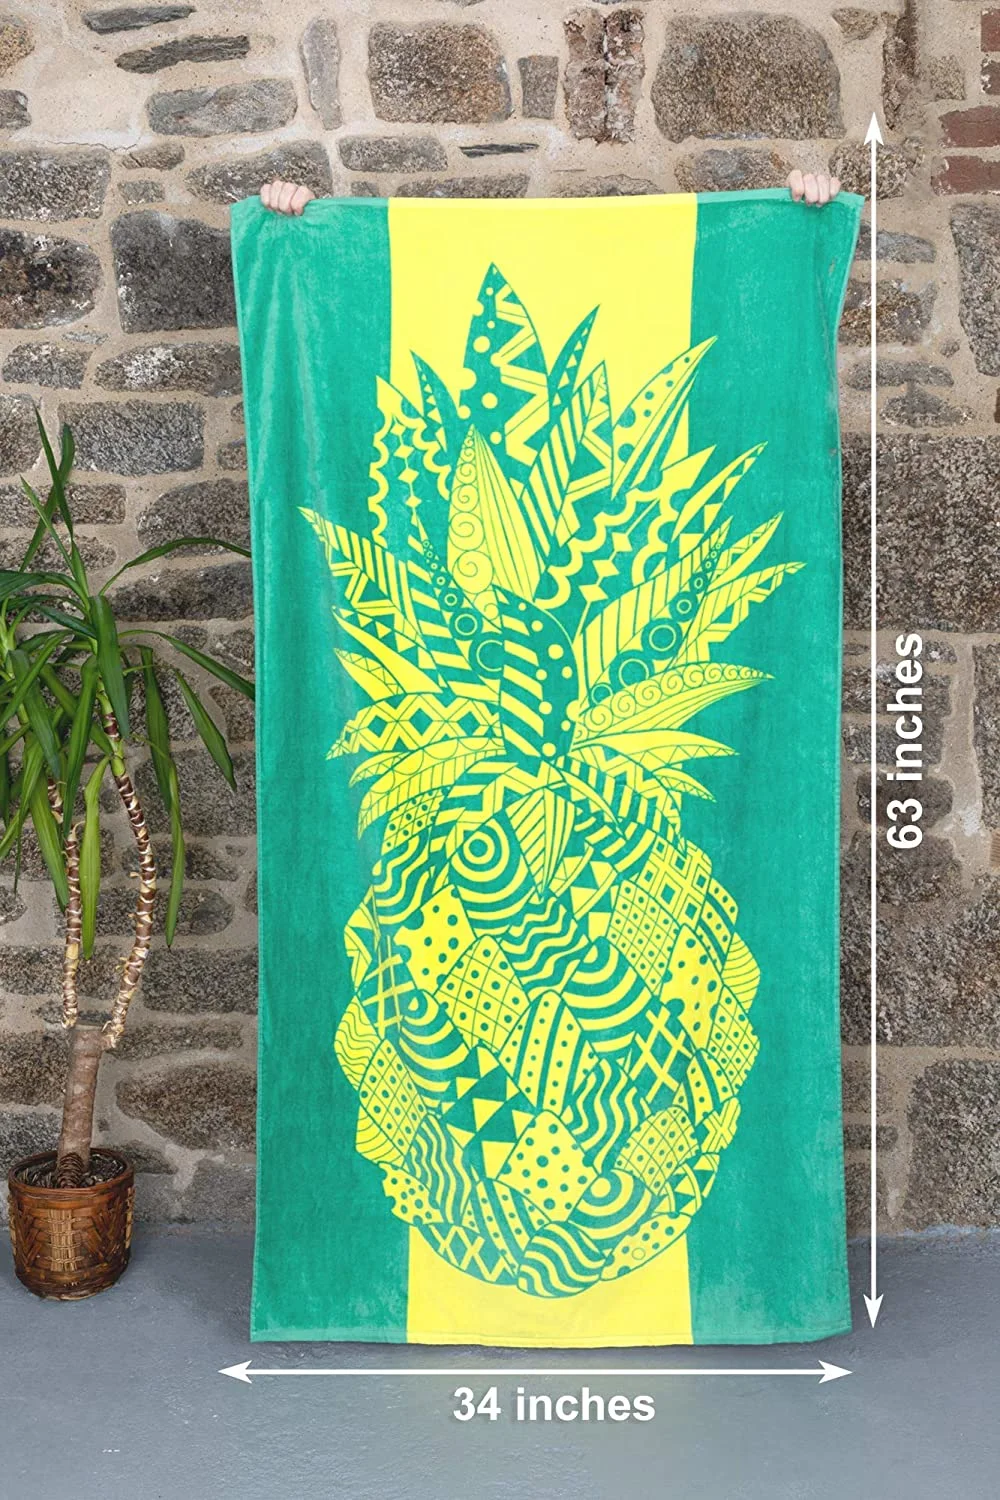 Nova Blue Pineapple Beach Towel – Yellow and Green with a Tropical Design, Extra Large, XL Made From 100% Cotton for Kids & Adults